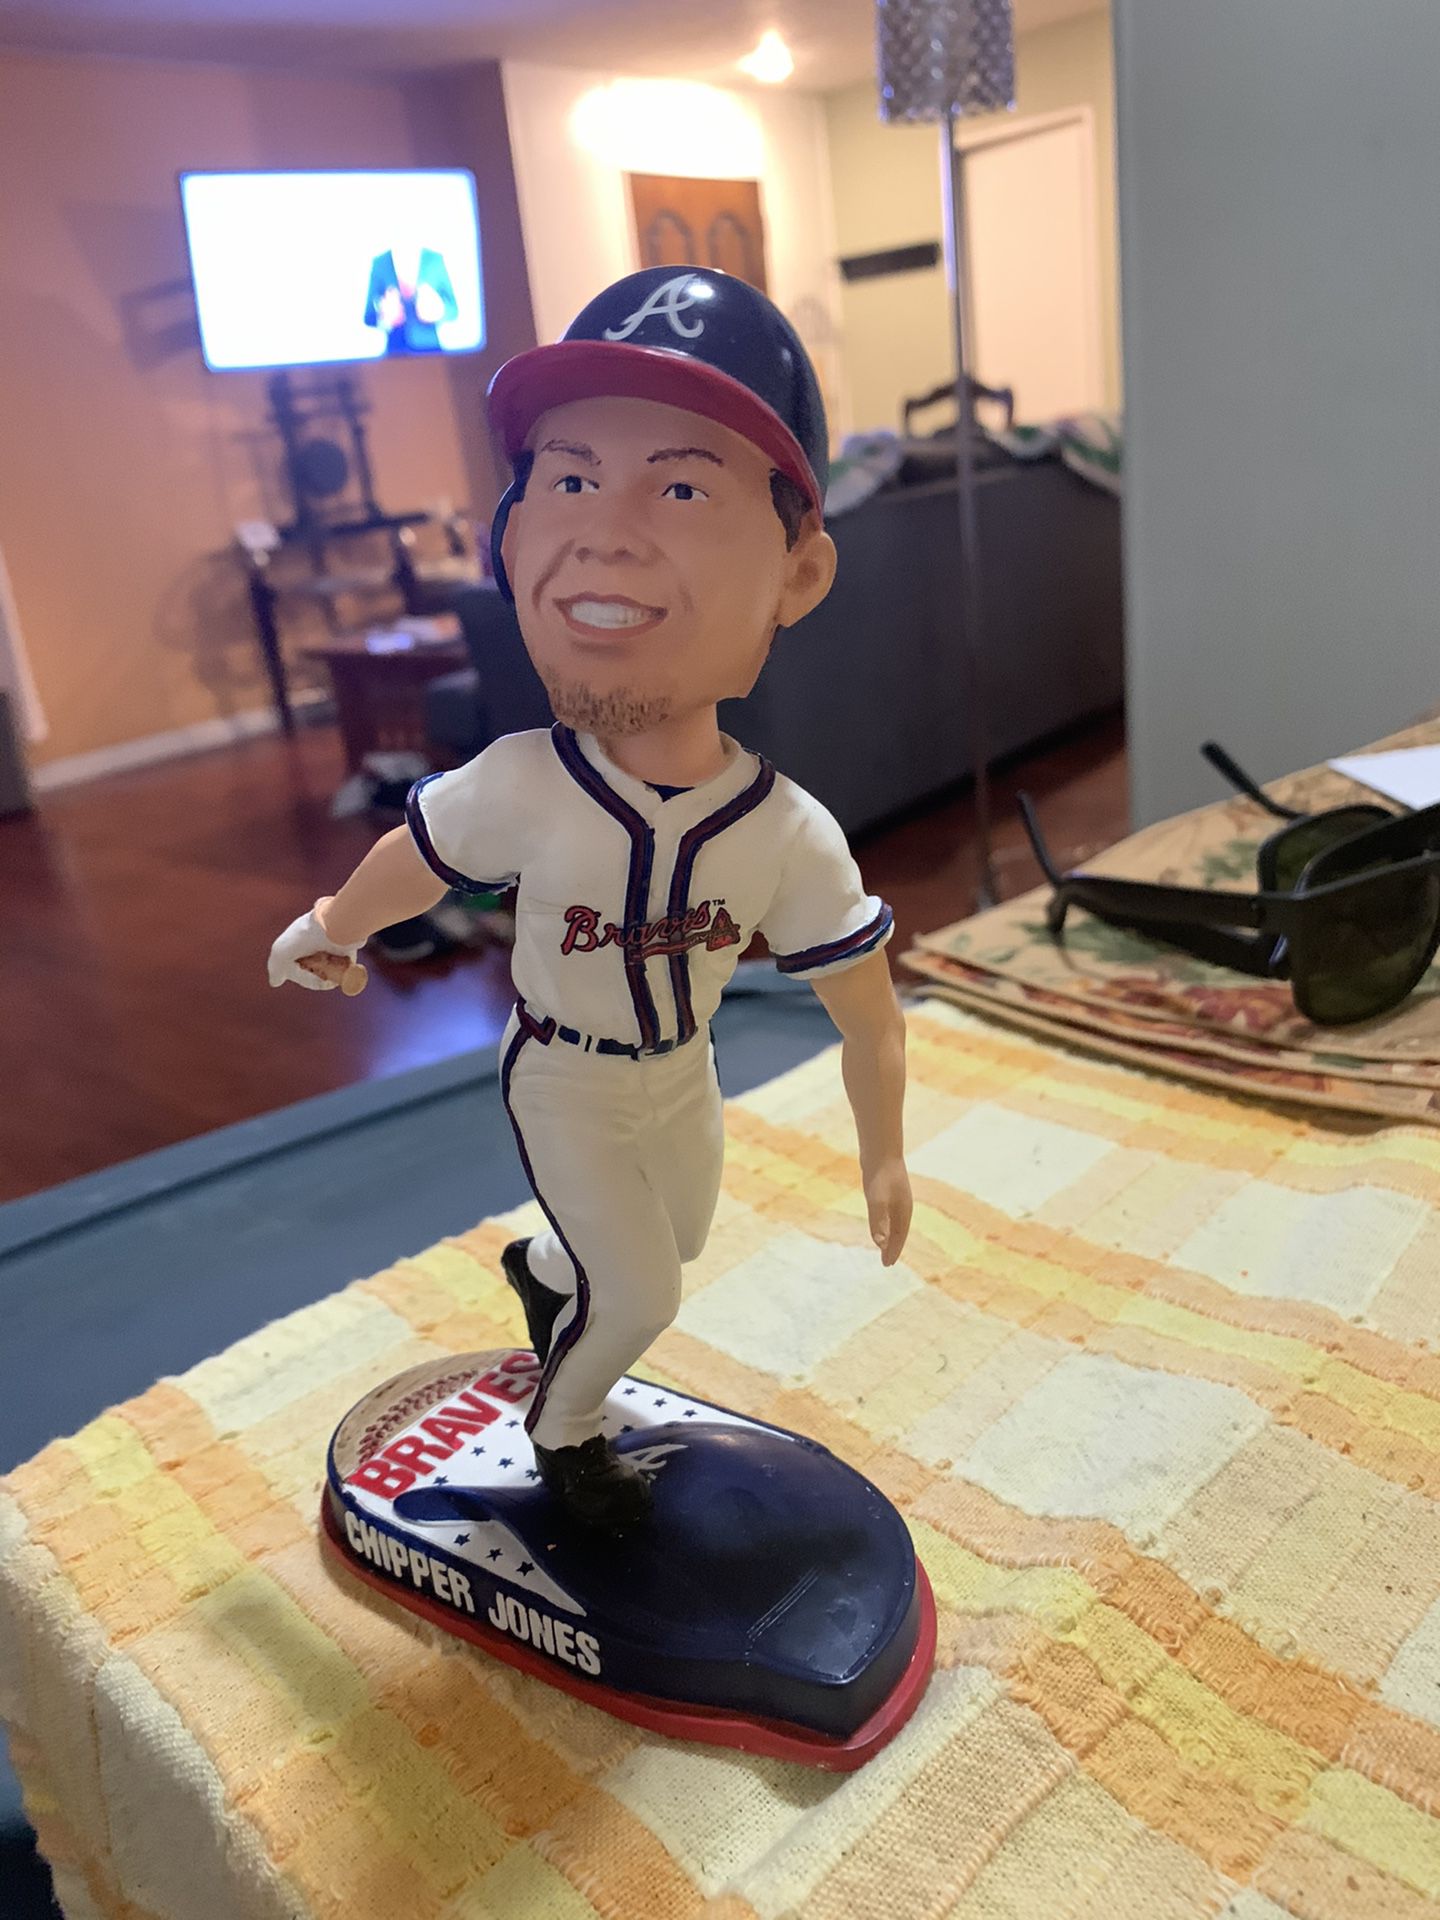 Forever Collectibles Chipper Jones Bobblehead